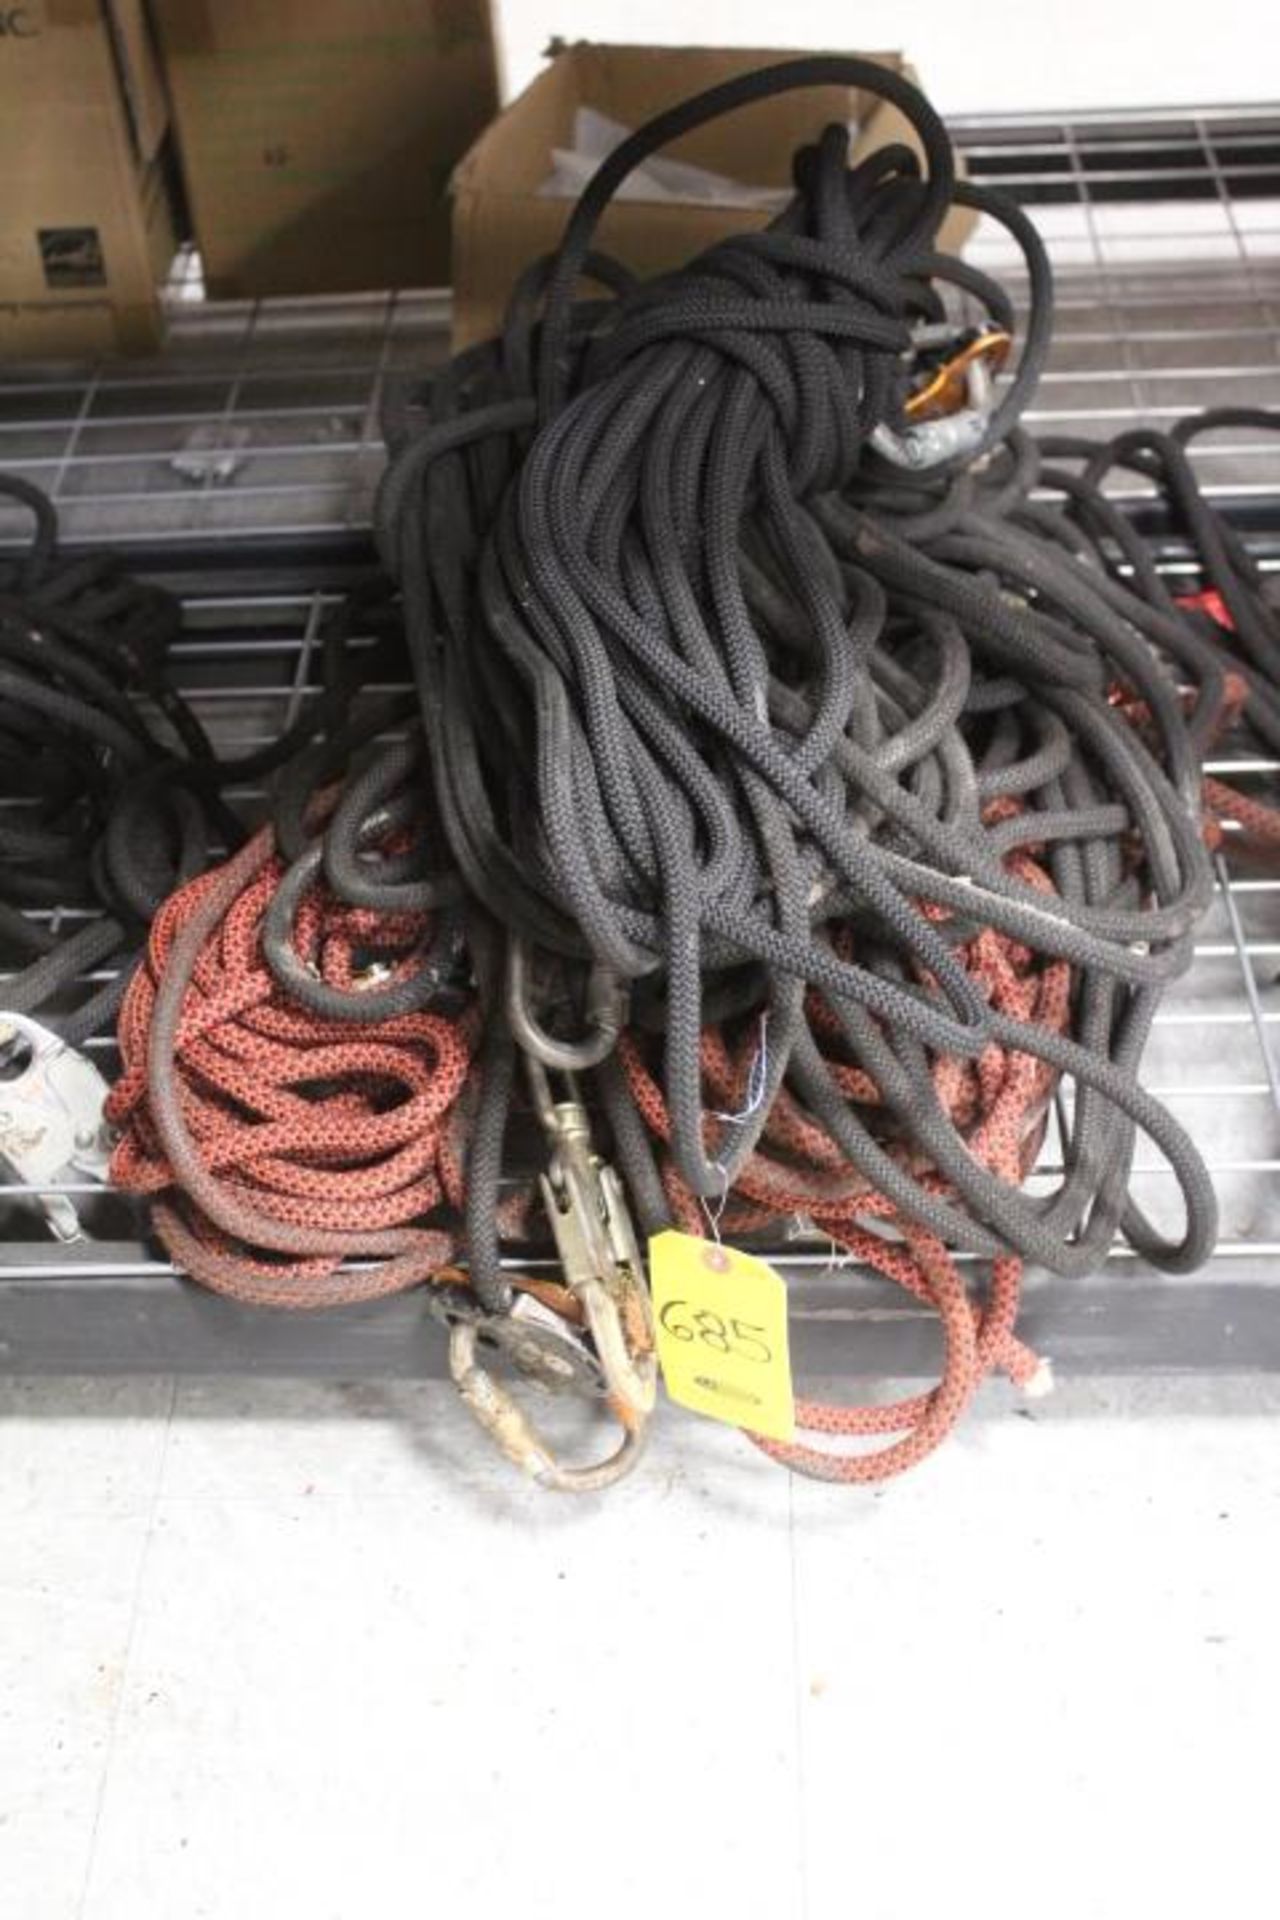 (6) SAFETY ROPES WITH ACCESSORIES